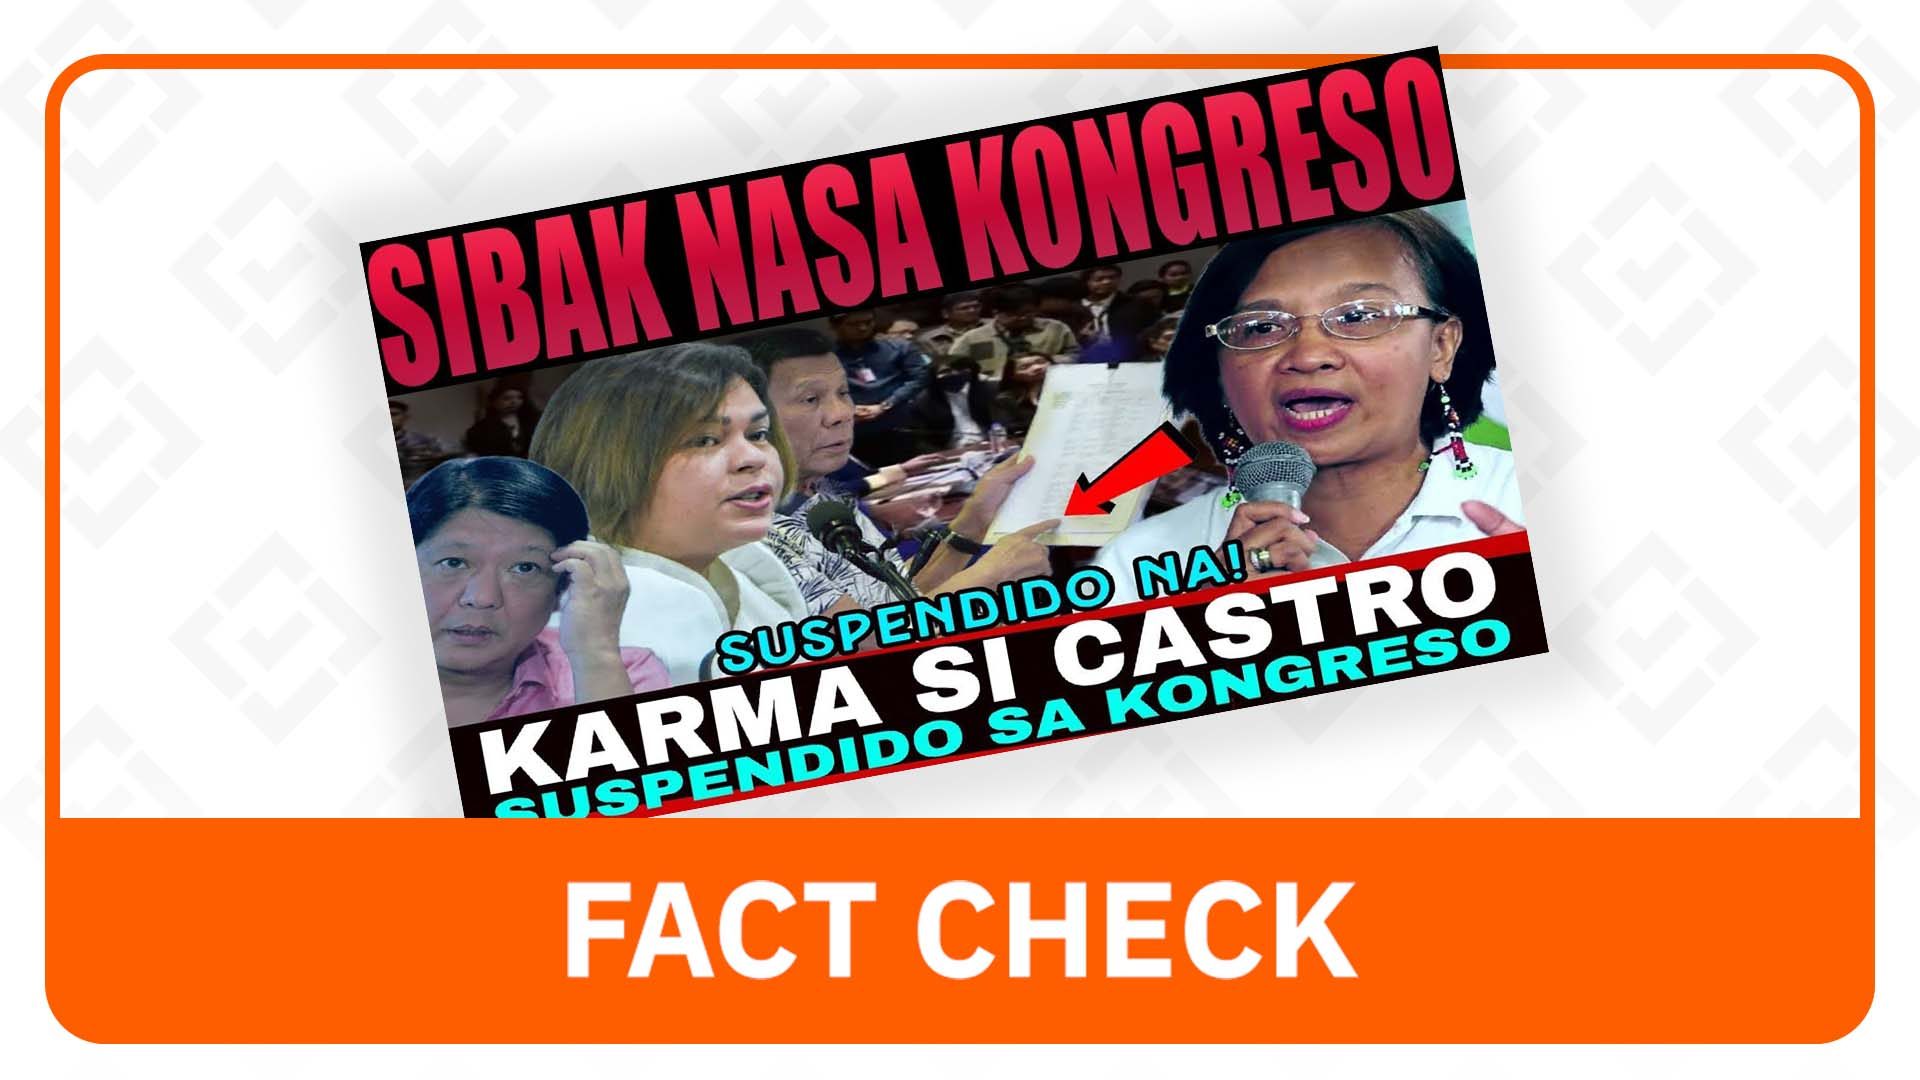 FACT CHECK: Castro not suspended from House of Representatives